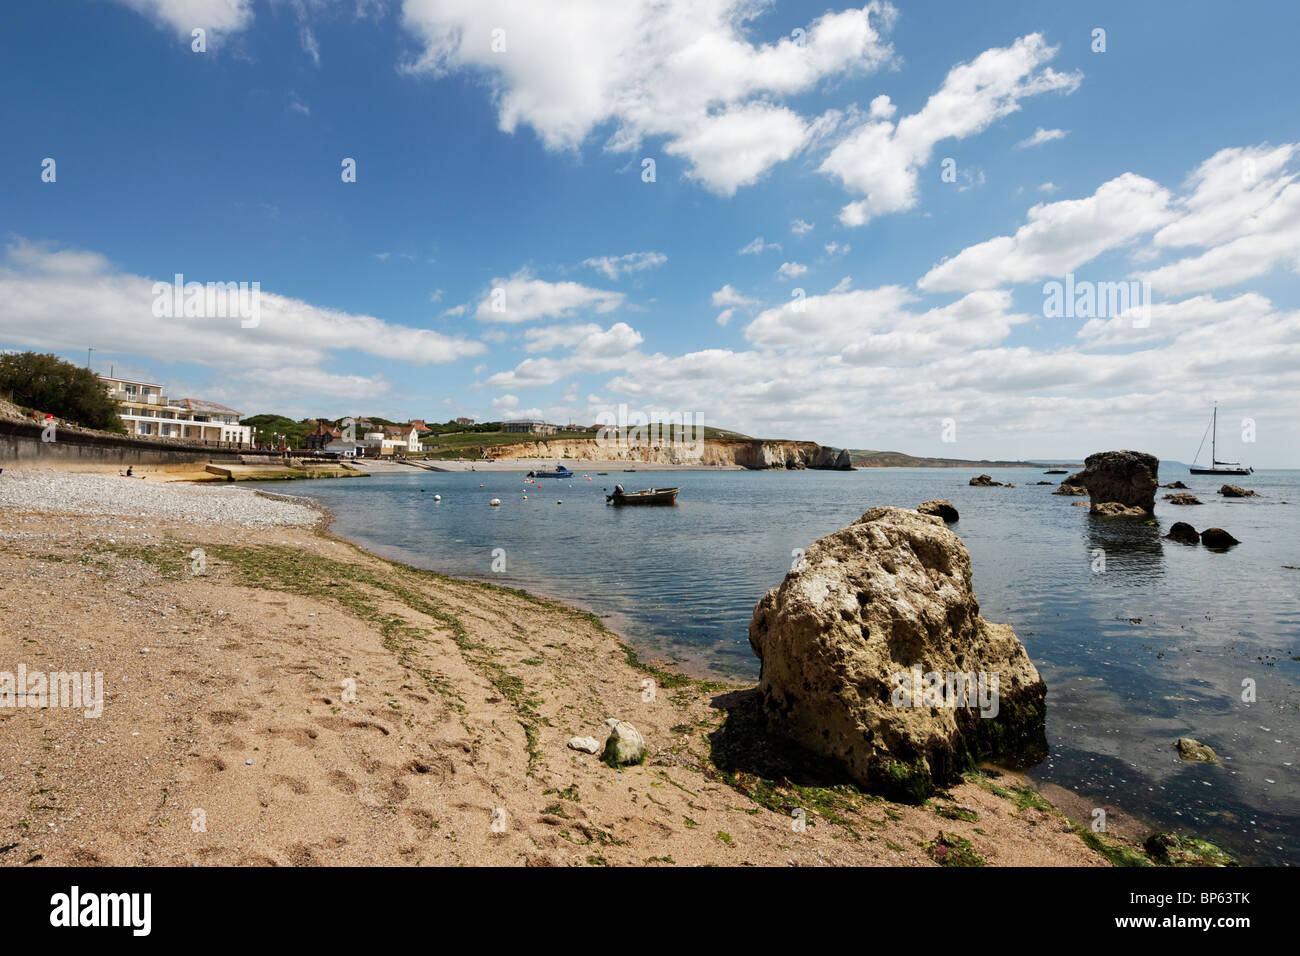 Freashwater bay seafront and beach on the Isle of Wight Stock Photo